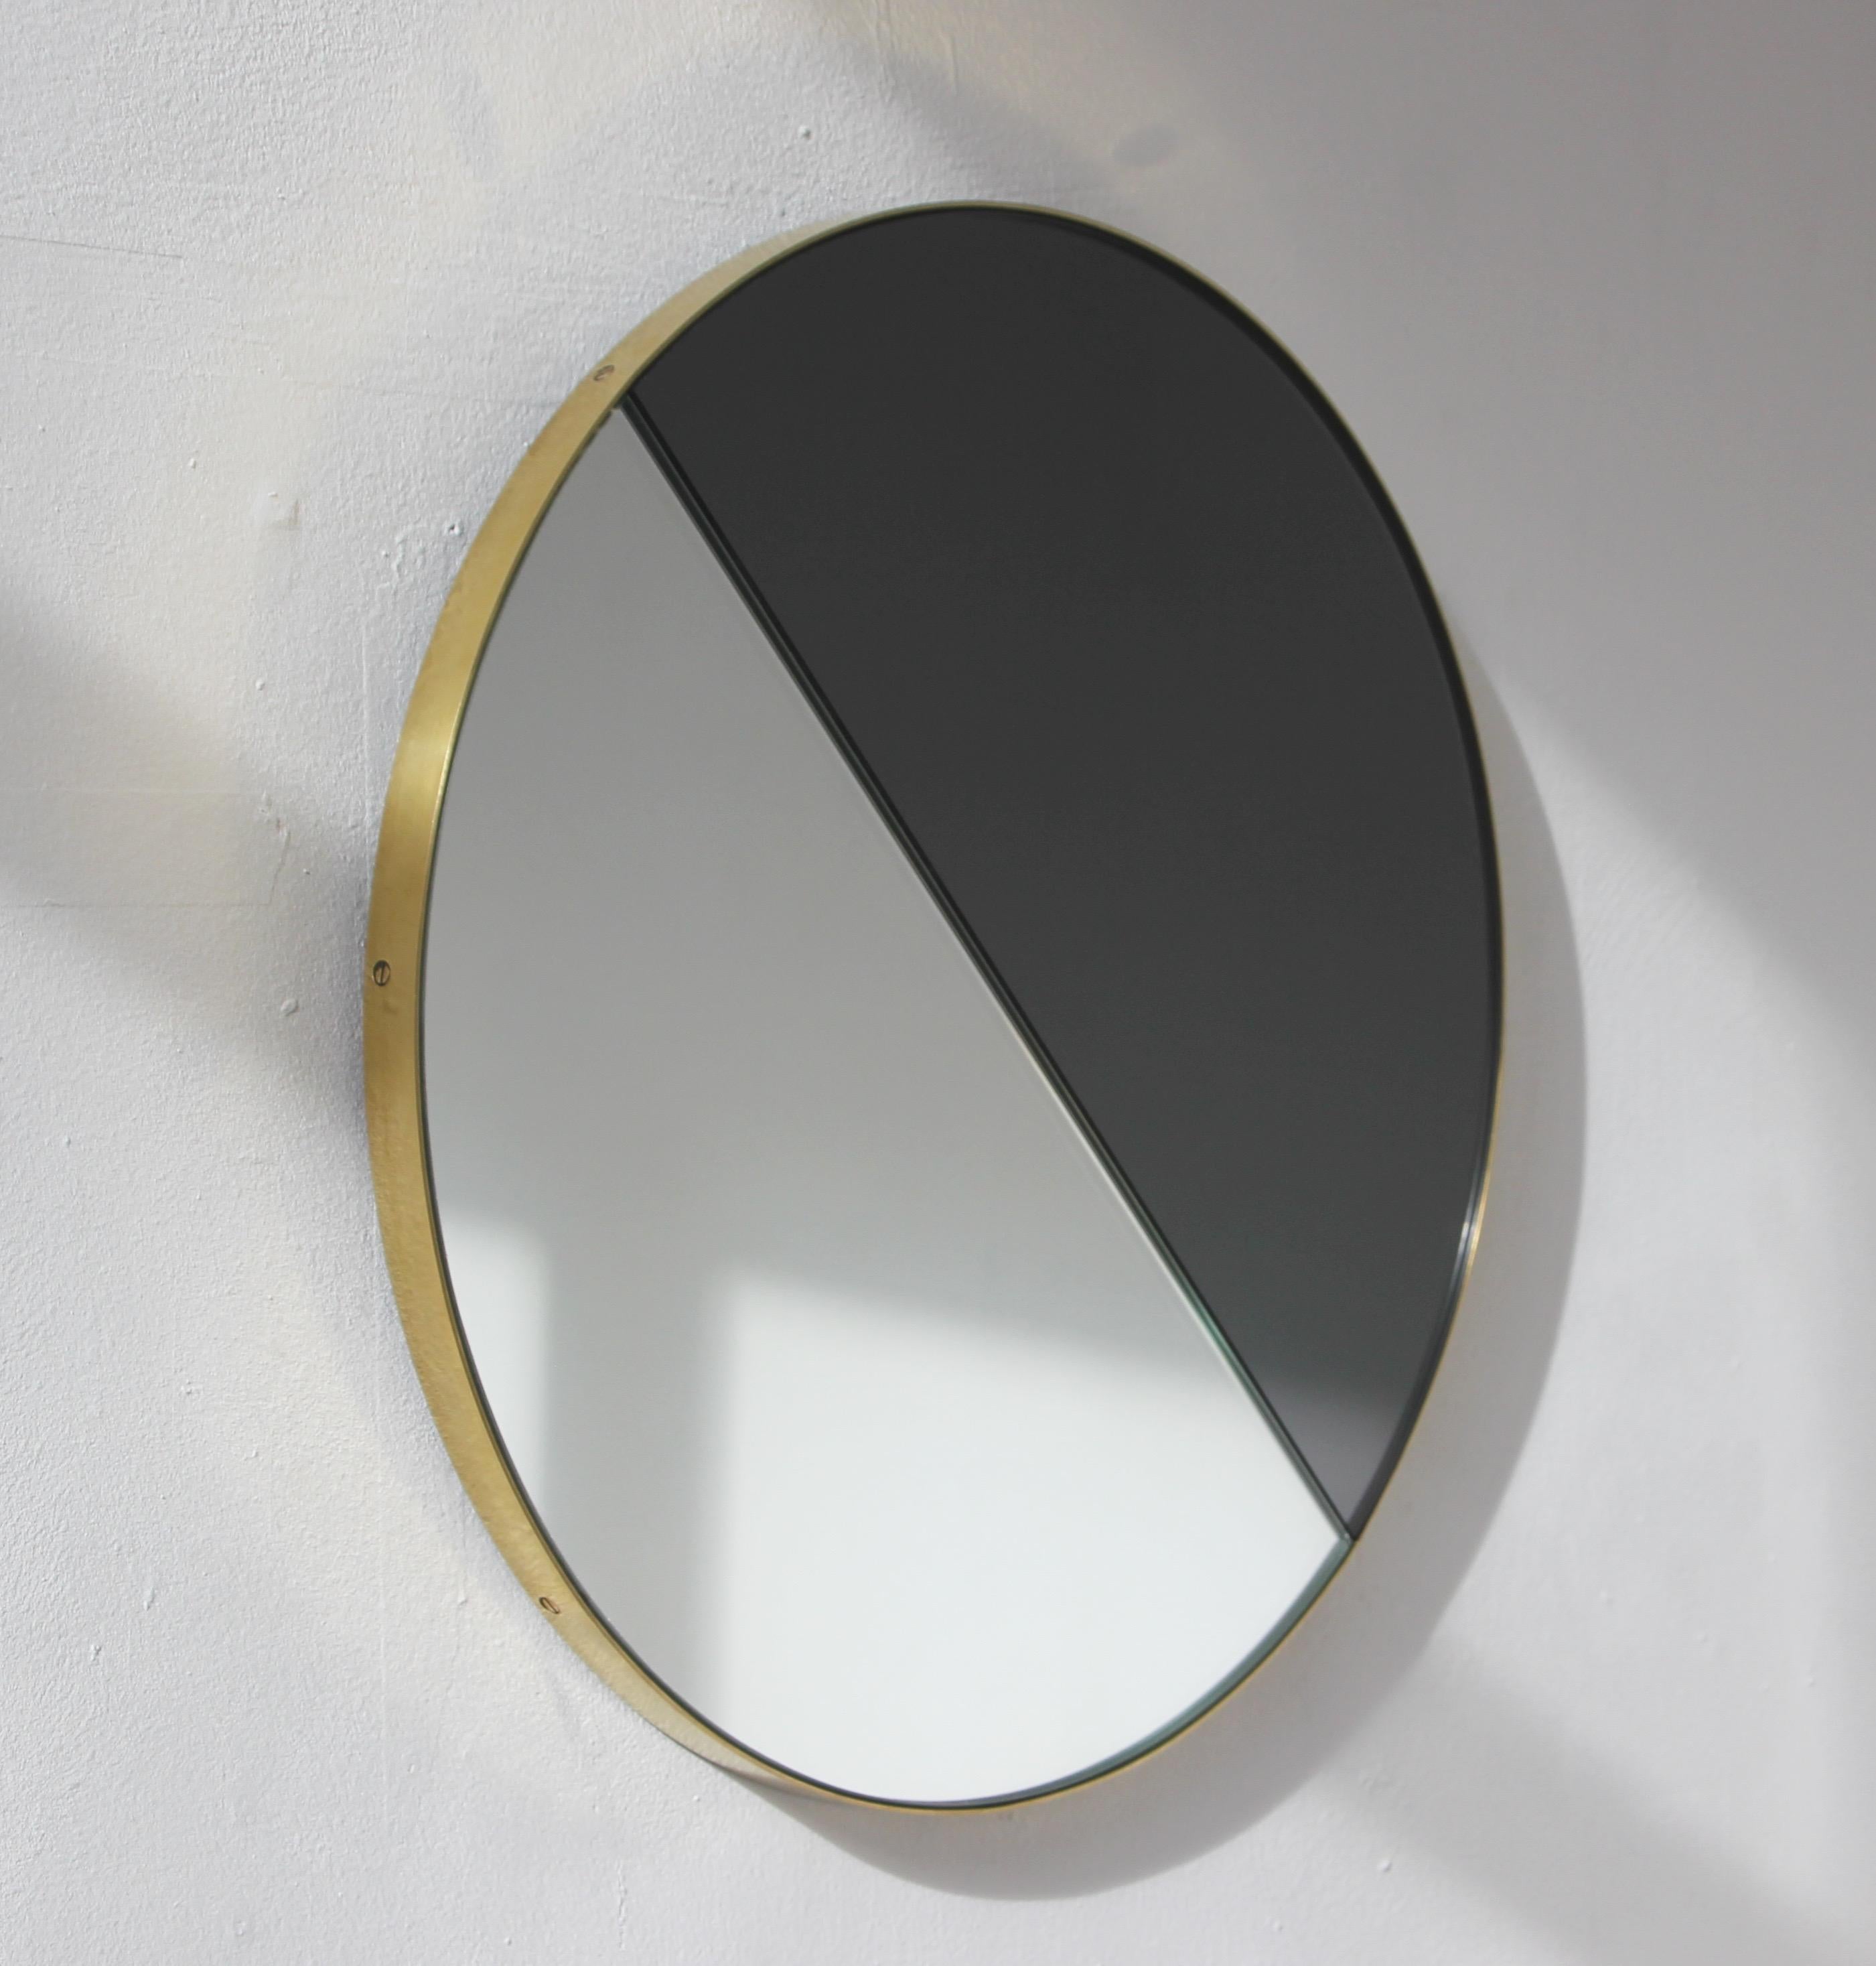 Brushed Orbis Dualis Mixed Tint Contemporary Round Mirror with Brass Frame, Regular For Sale